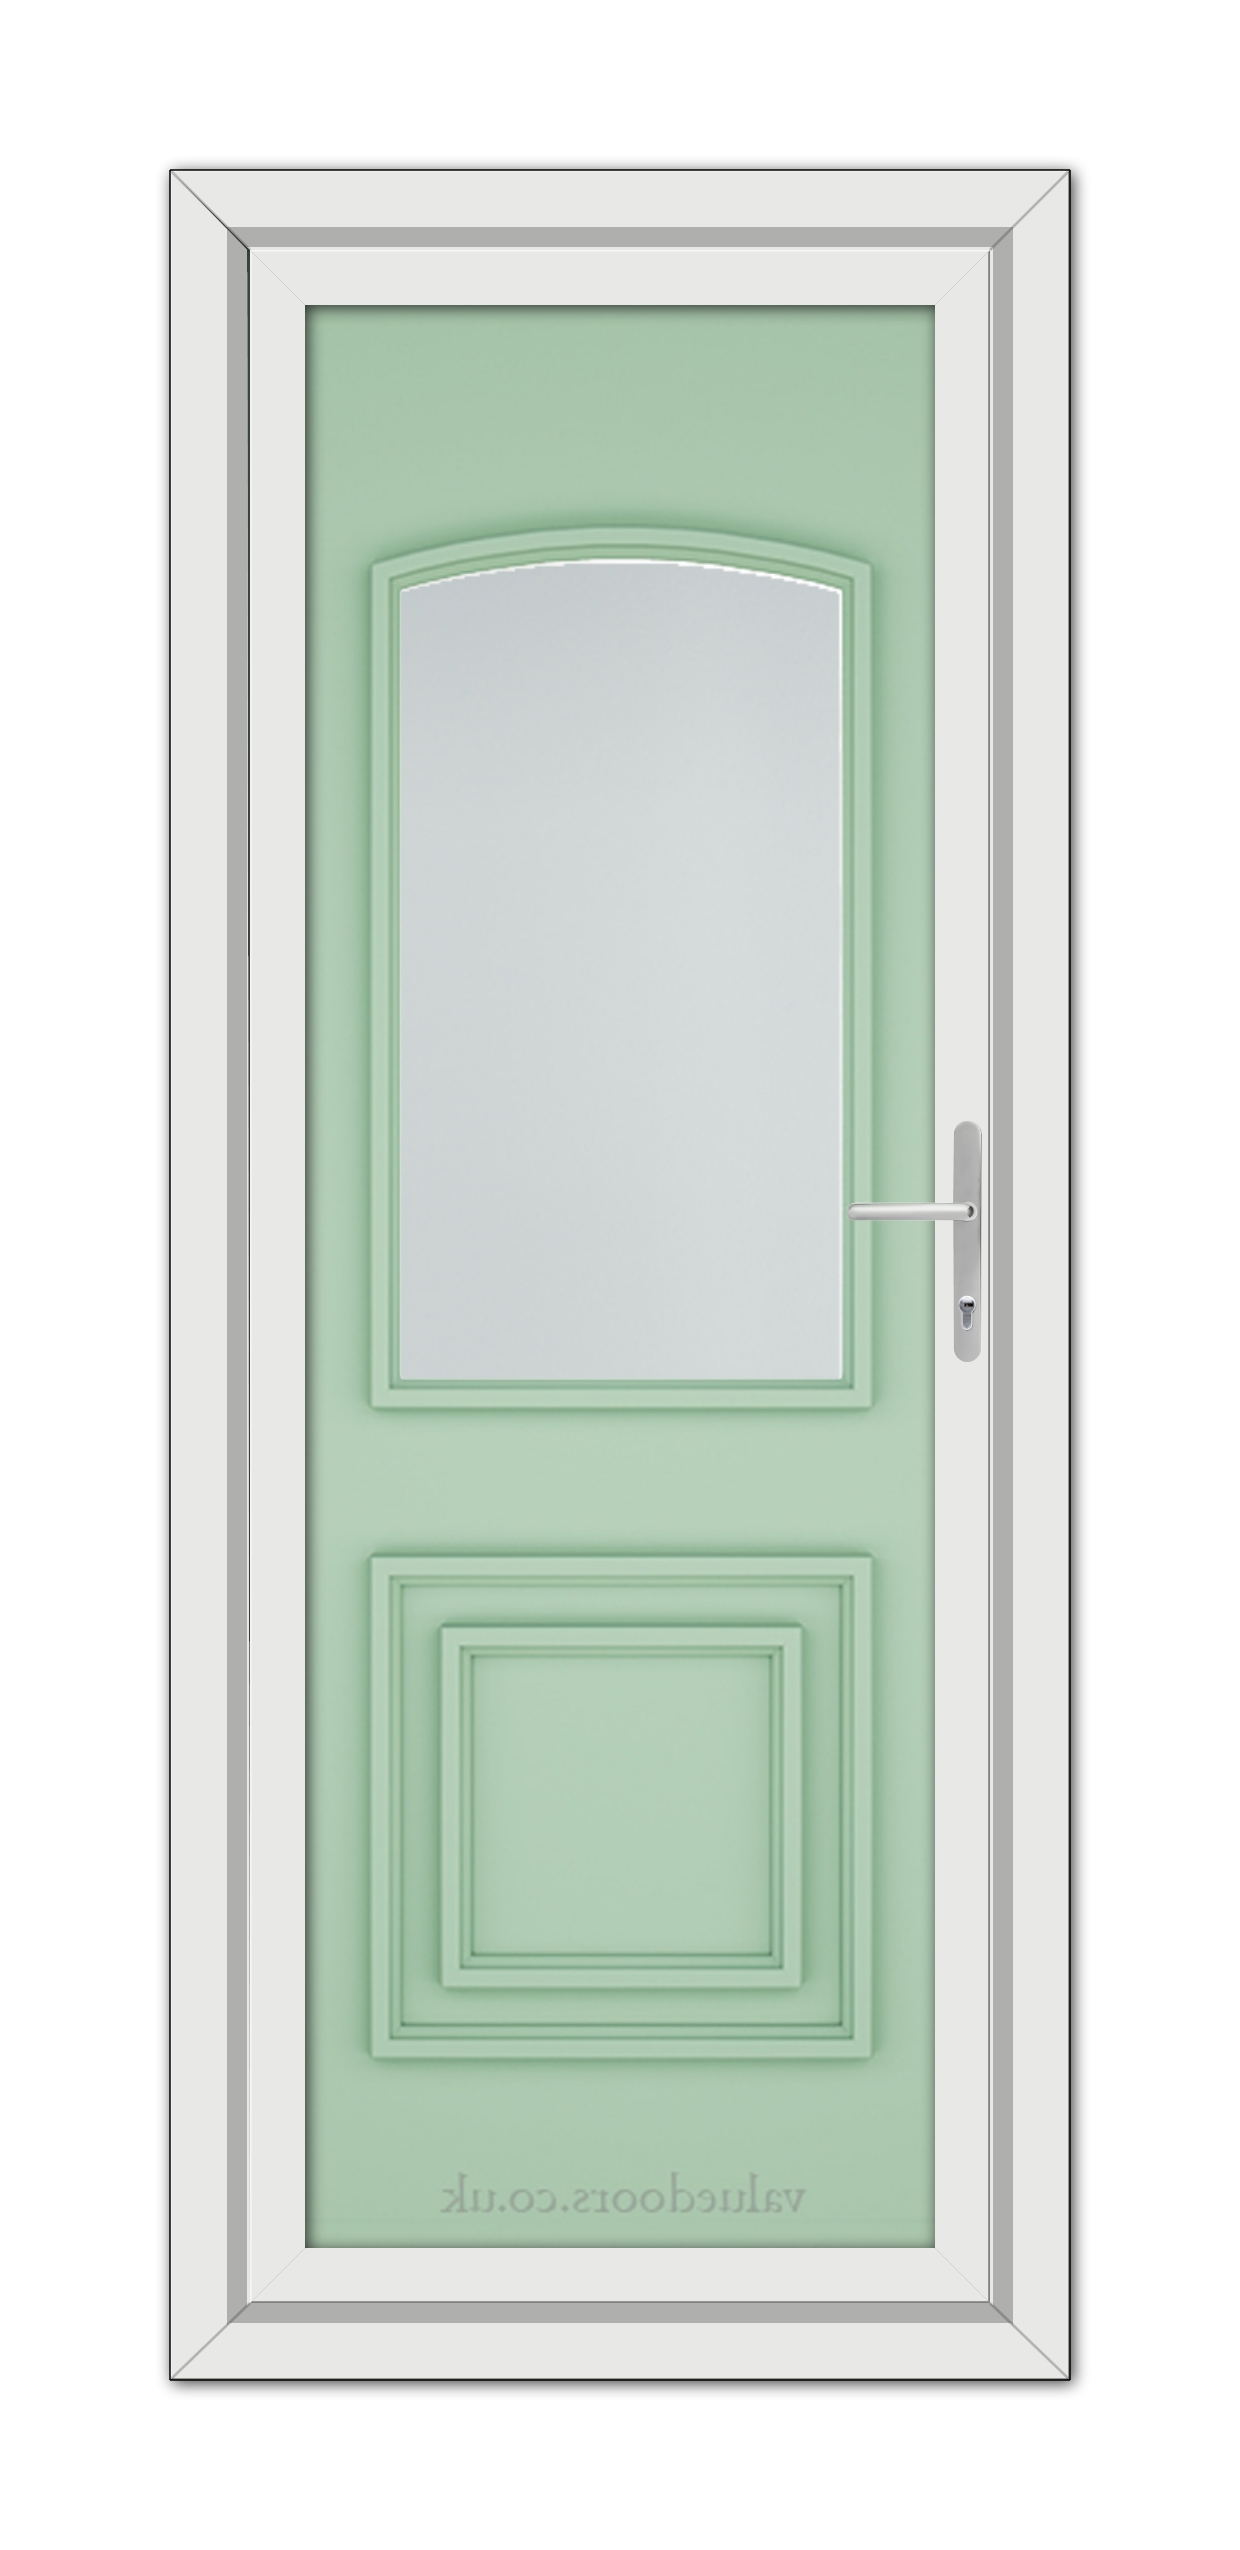 A close-up of a Chartwell Green Balmoral Classic uPVC Door.